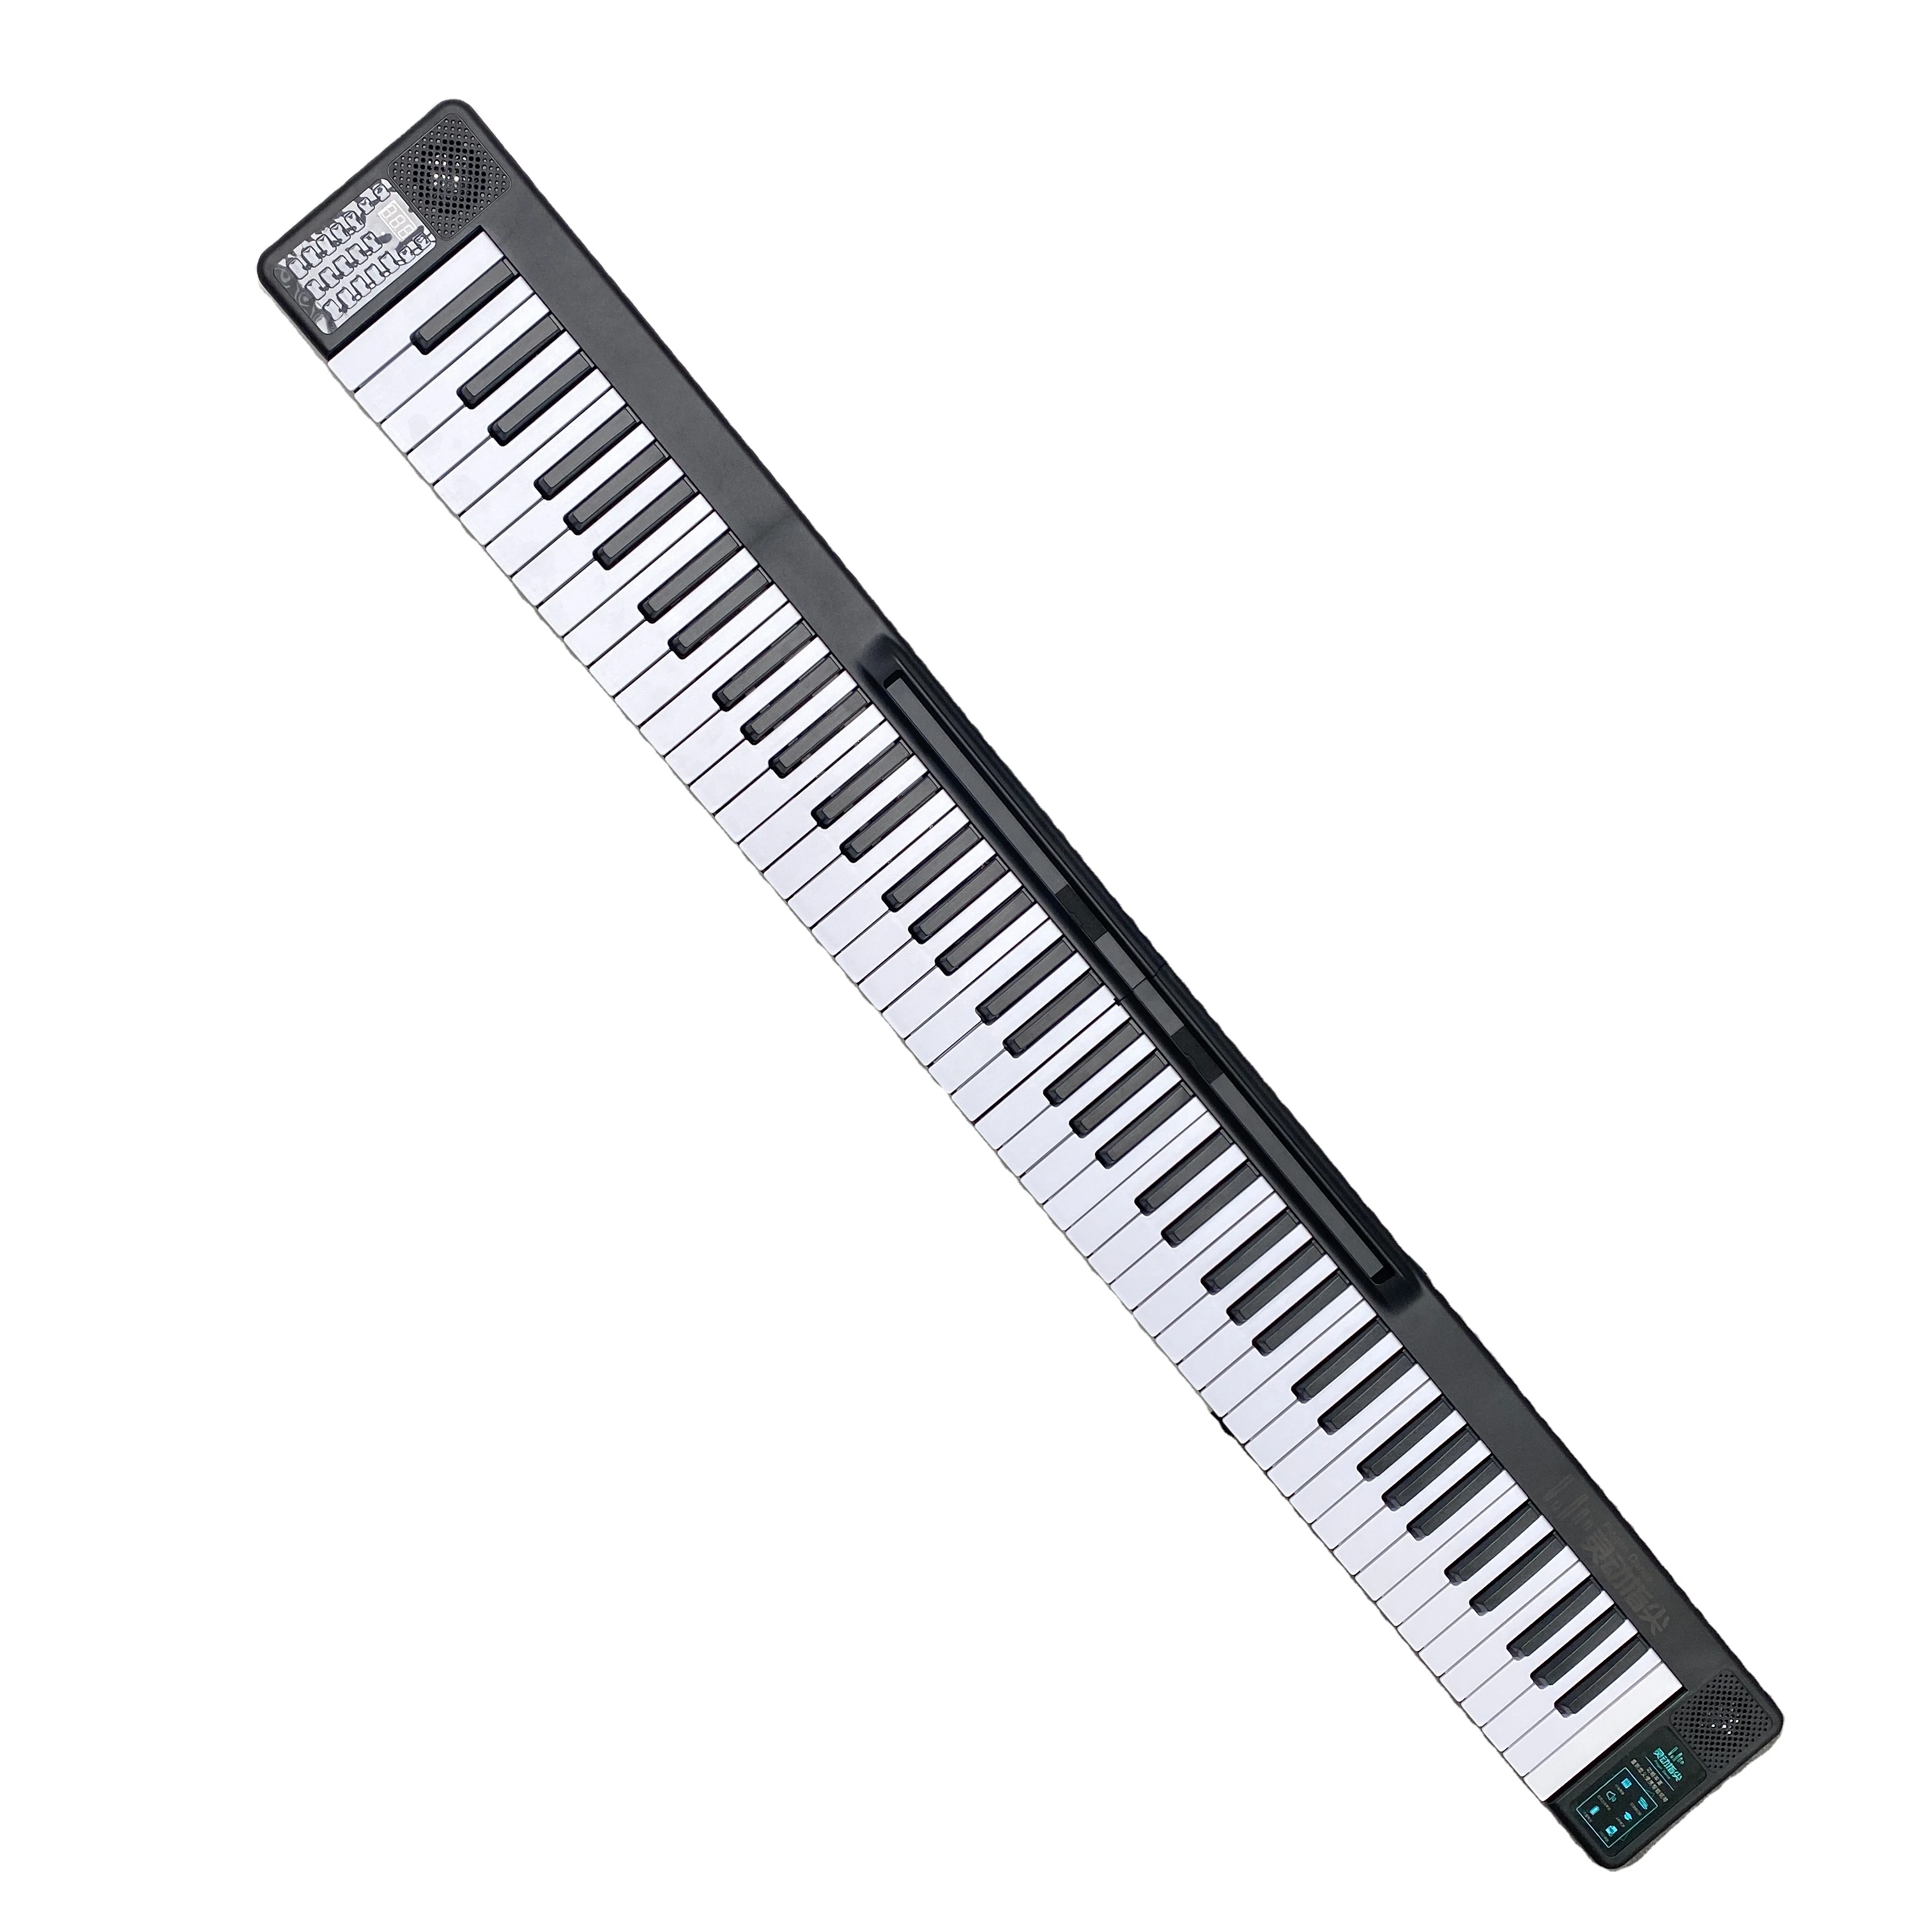 Easy Carry New Foldable Piano Wholesale Electronic Keyboard Lightweight Digital Piano